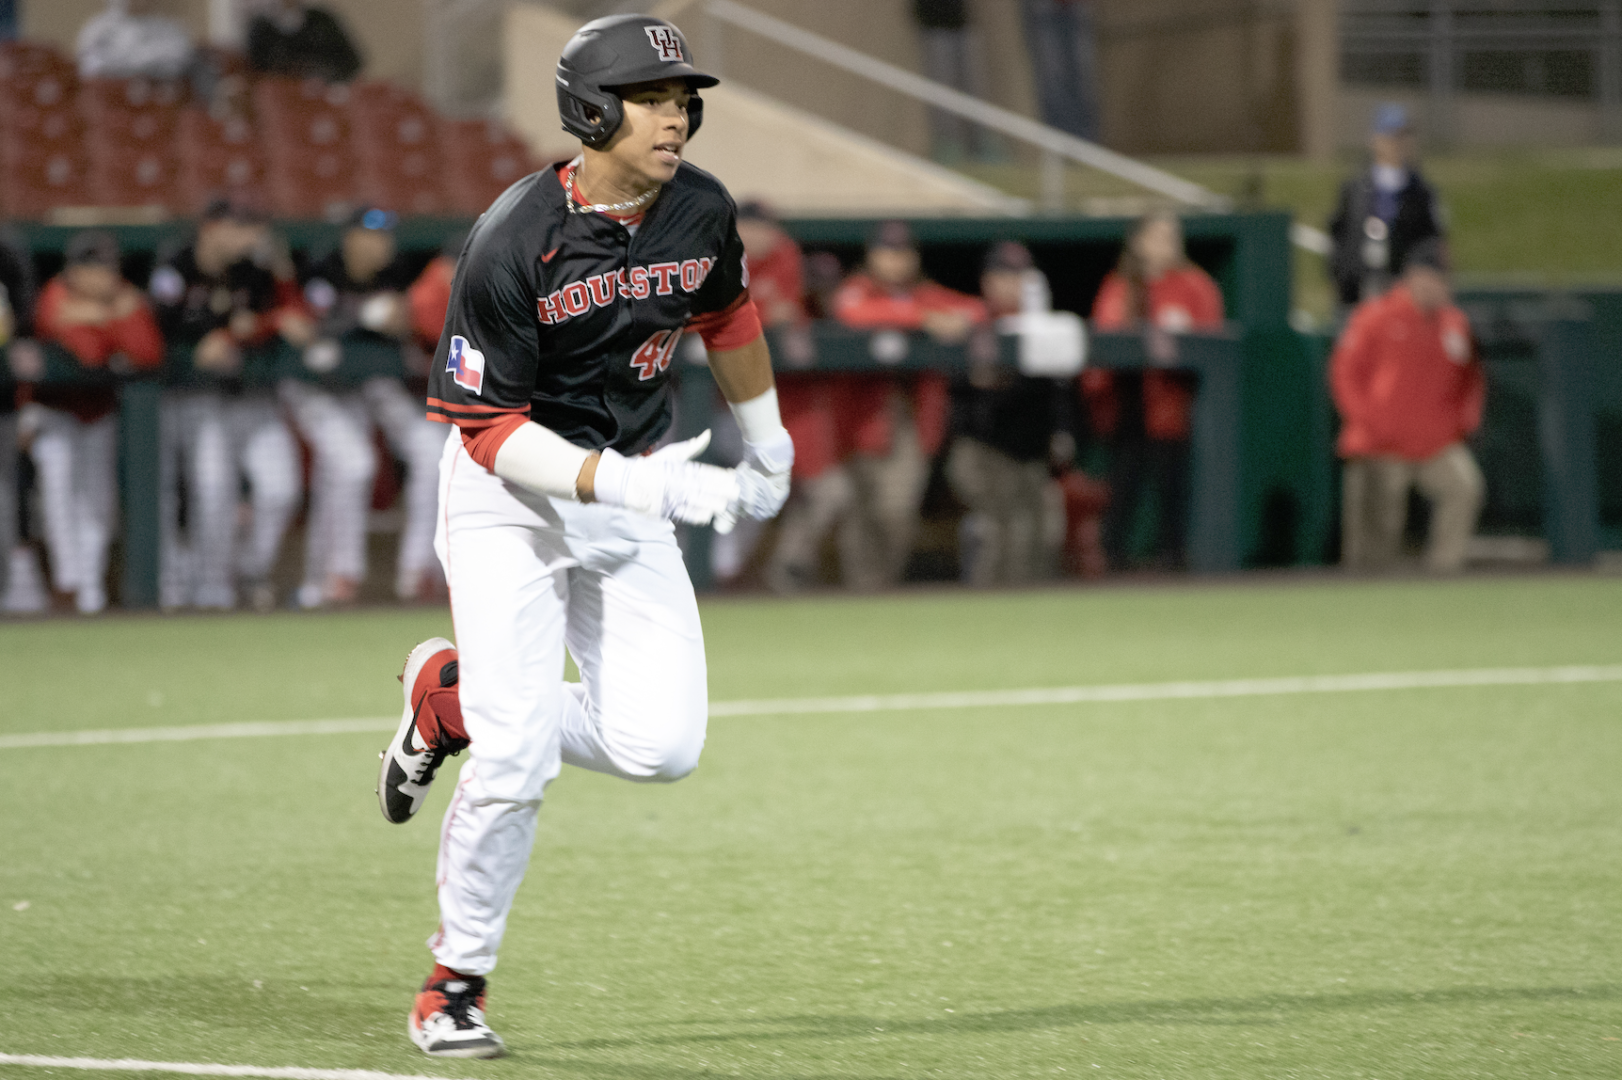 Junior Ryan Hernandez had a strong showing in UH's last game of the Cougars' opening weekend, hitting a solo home run in Sunday's loss to Youngstown State at Schroeder Park. | Jhair Romero/The Cougar